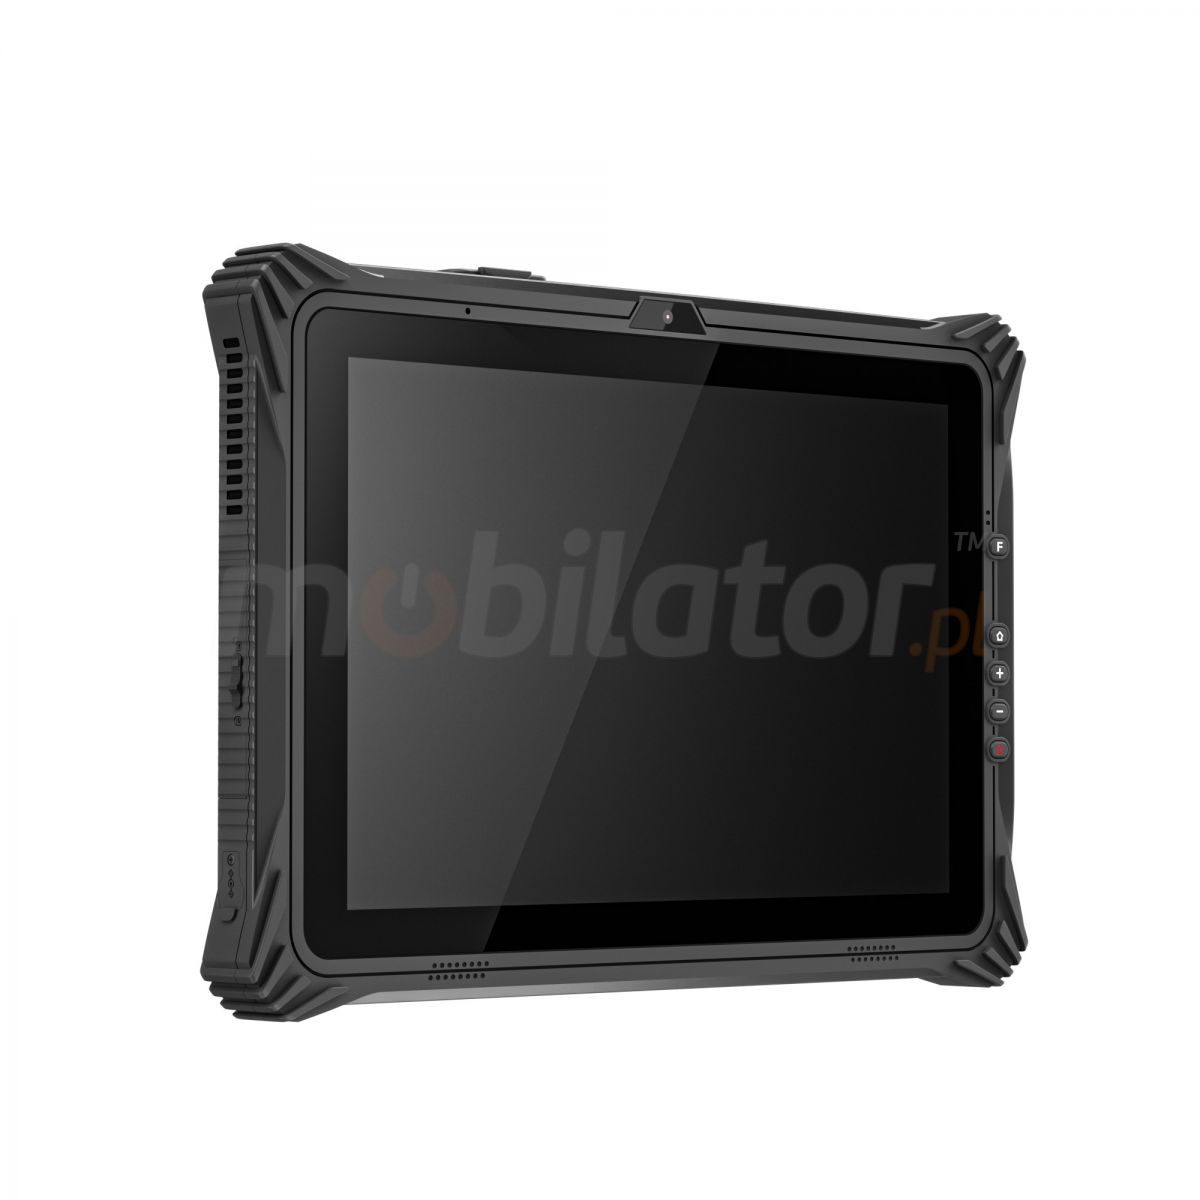 Emdoor I20U v.6 - Shockproof 12.2 inch tablet with NFC, connectors, 4G and Windows 10 PRO, 2D code reader, Bluetooth 4.2, 8GB RAM and 128GB ROM 